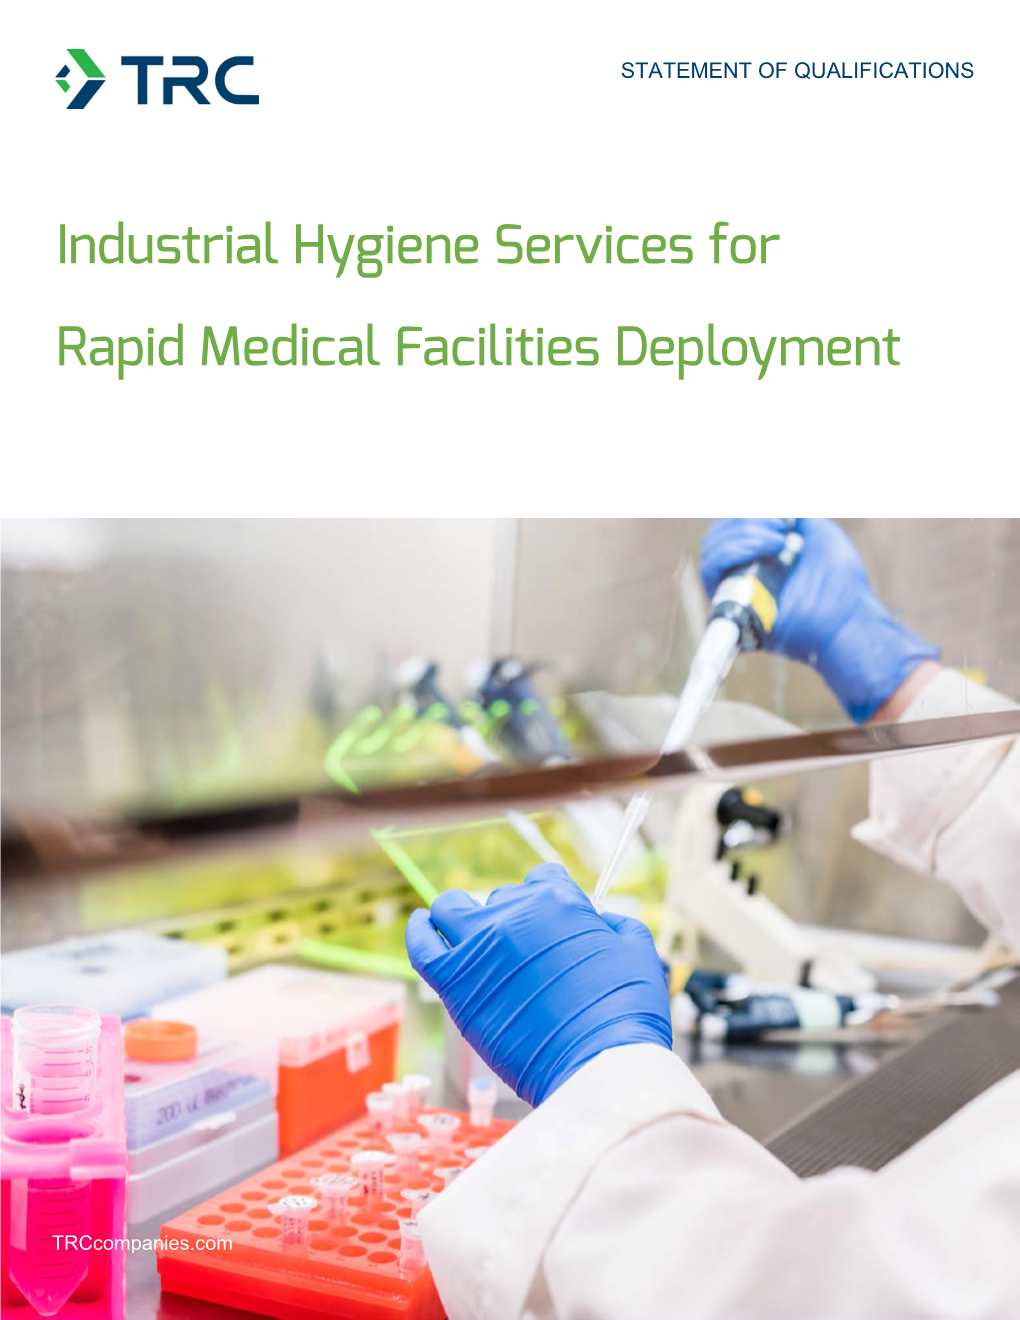 Industrial Hygiene Services for Rapid Medical Facilities Deployment